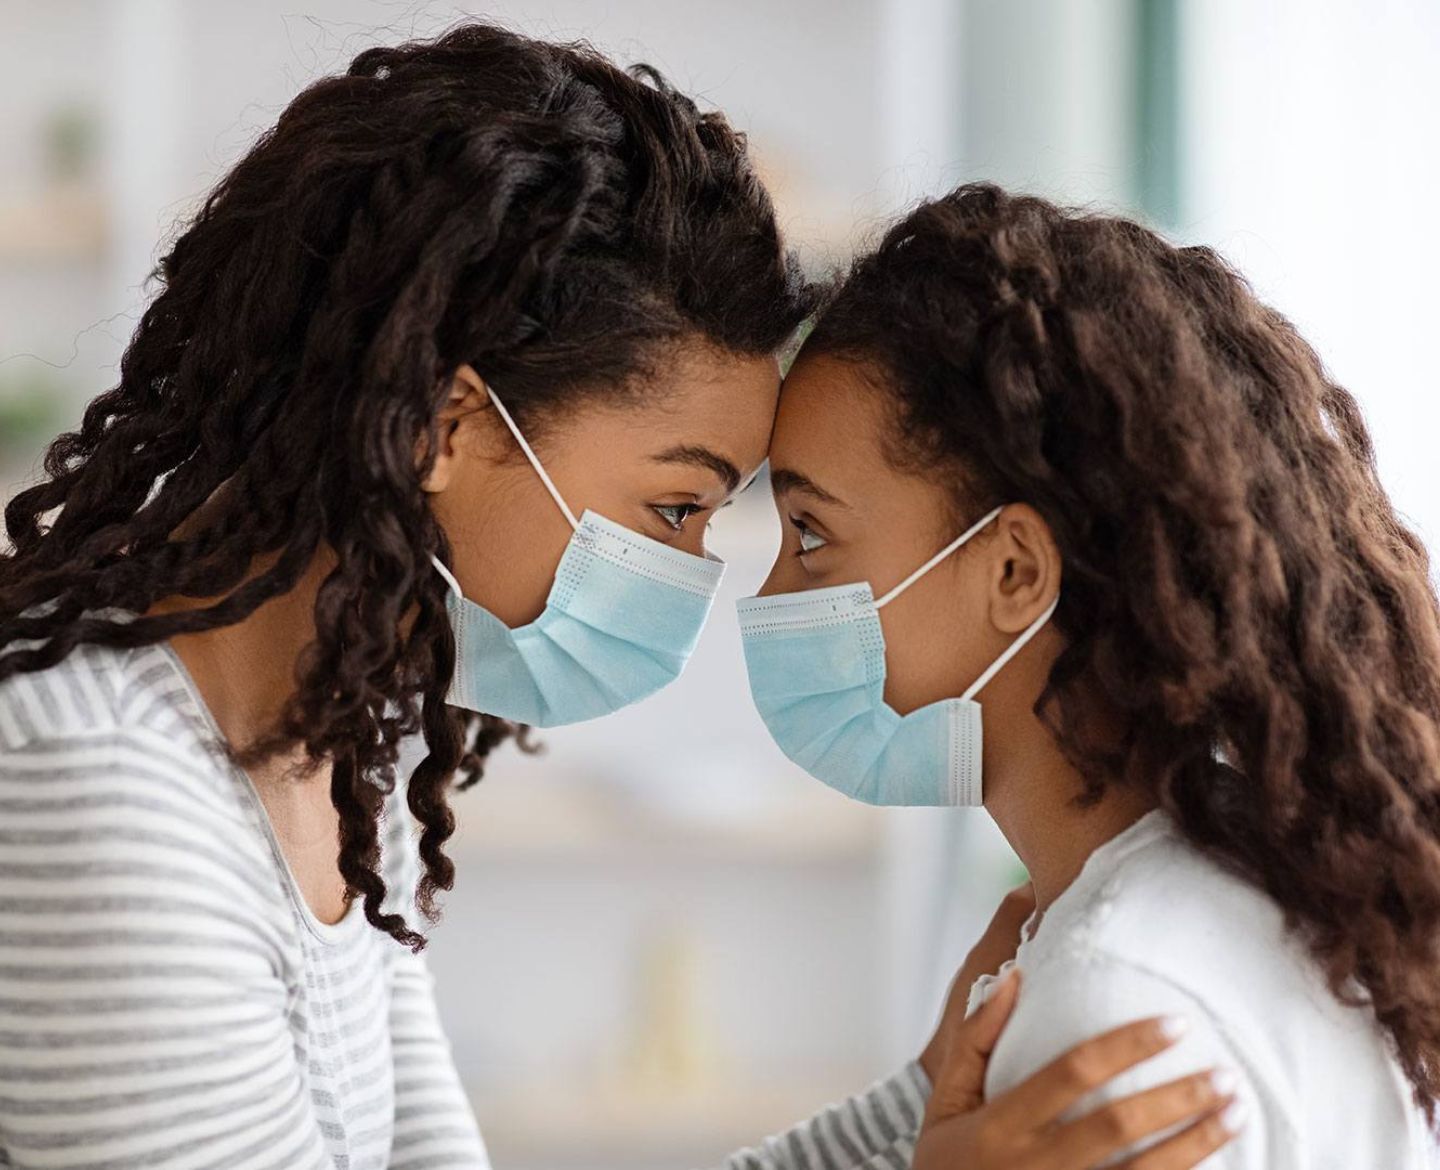 mom and daughter looking eye to eye while wearing masks